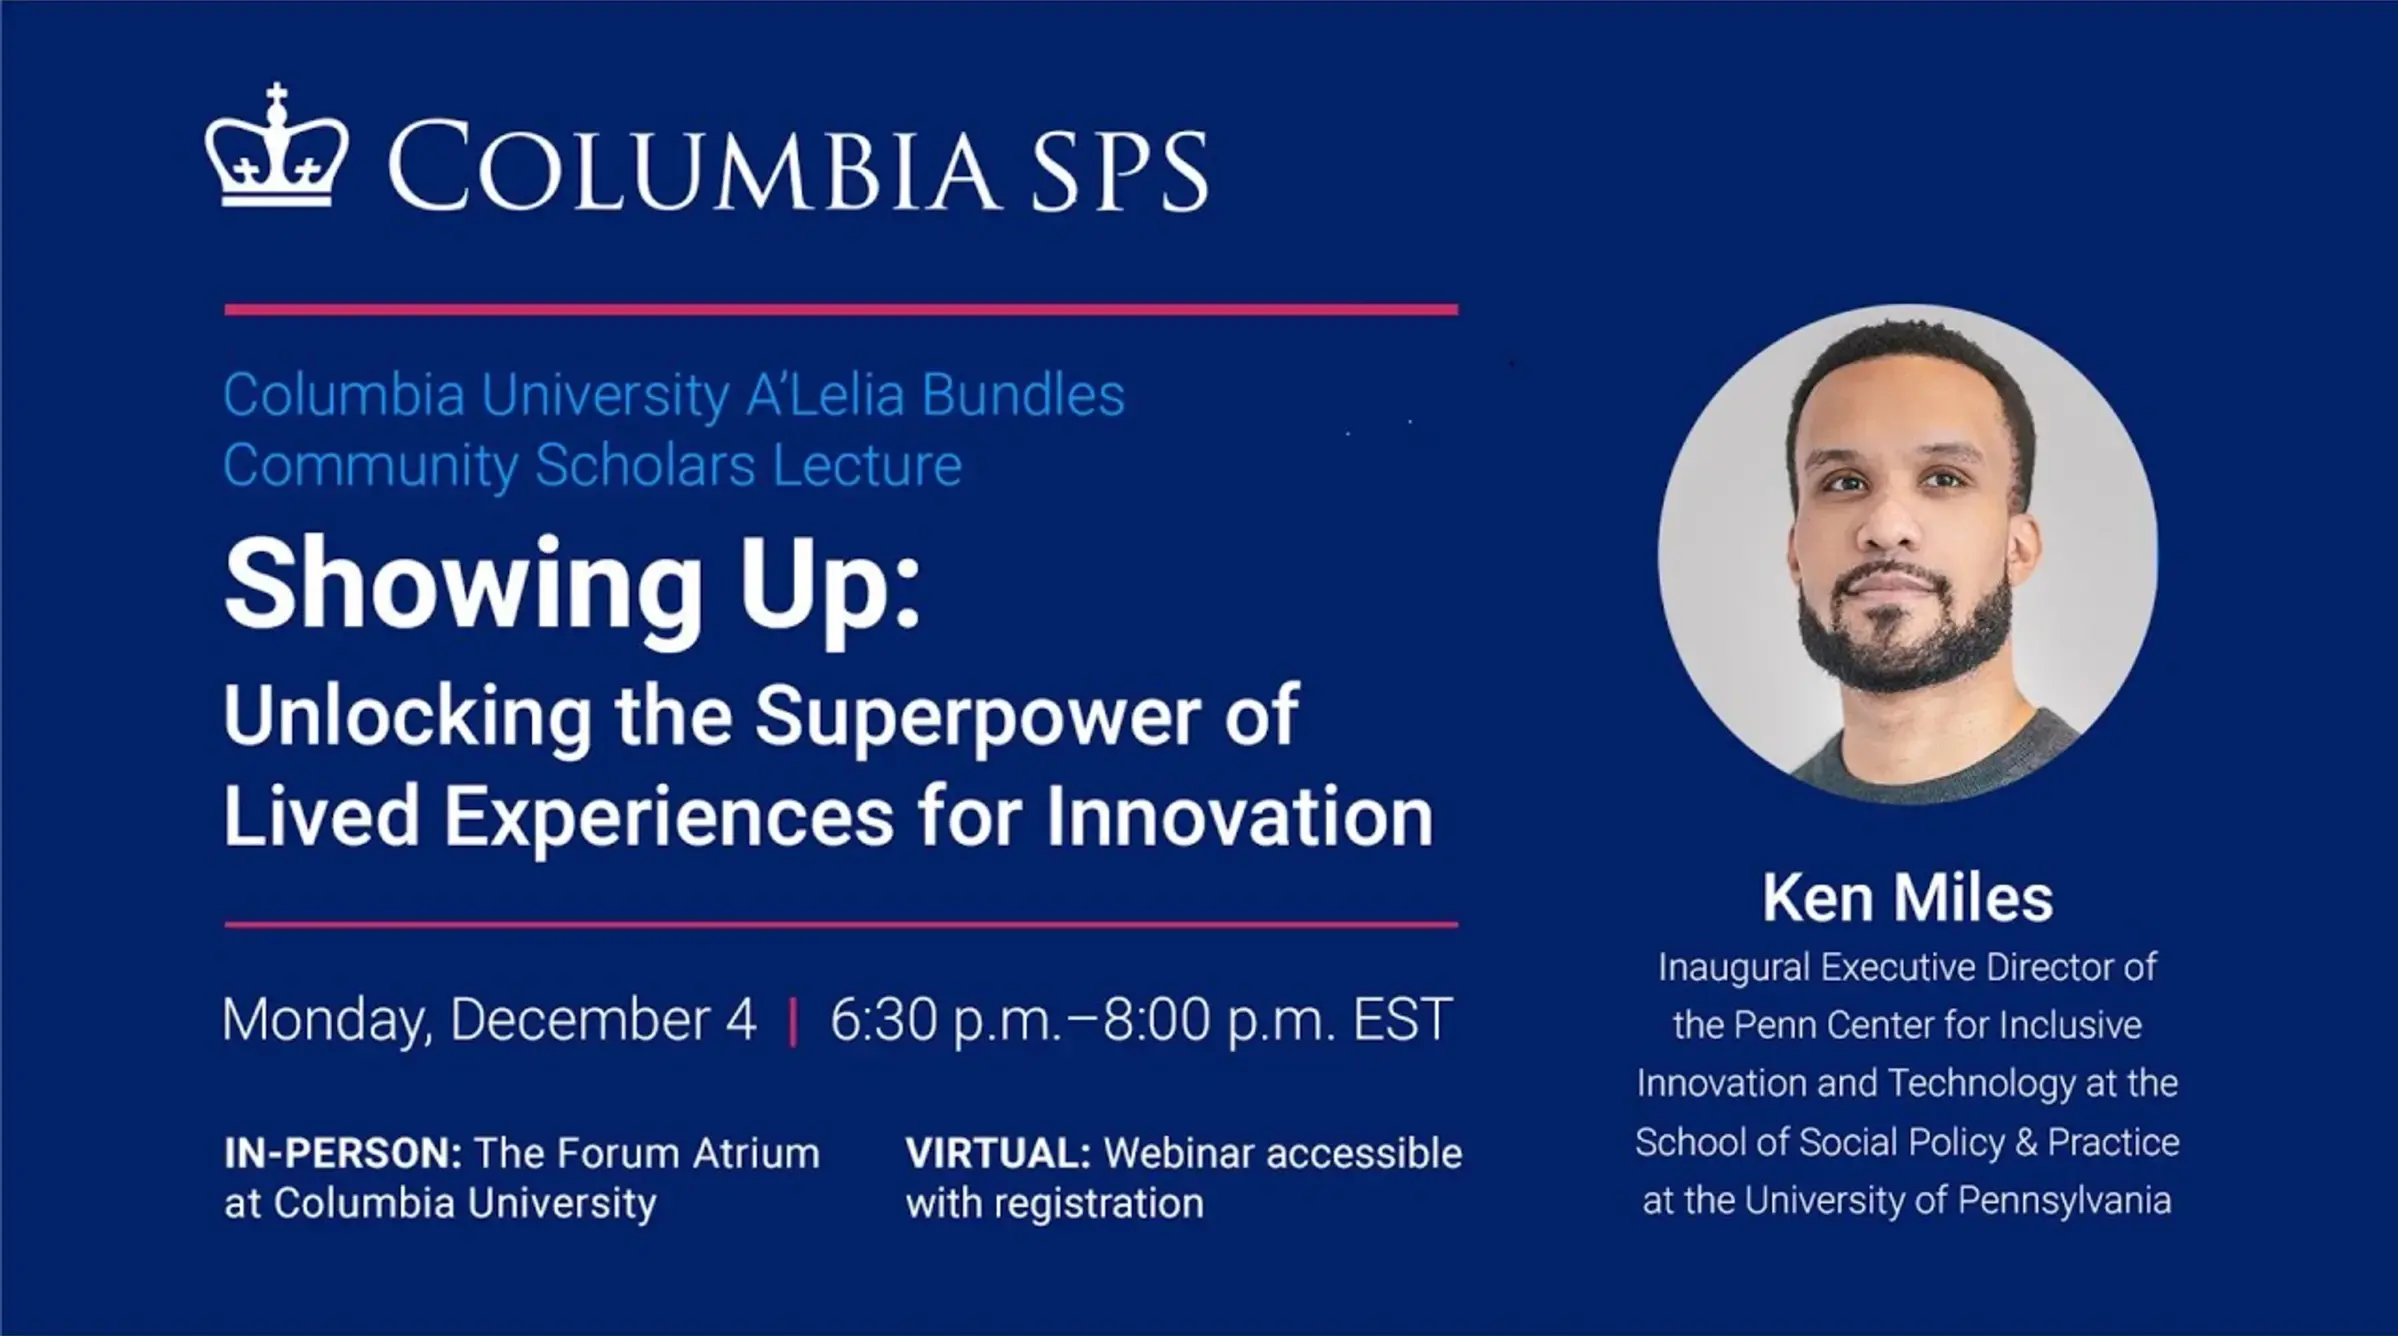 Showing Up: Unlocking the Superpower of Lived Experiences for Innovation with Ken Miles